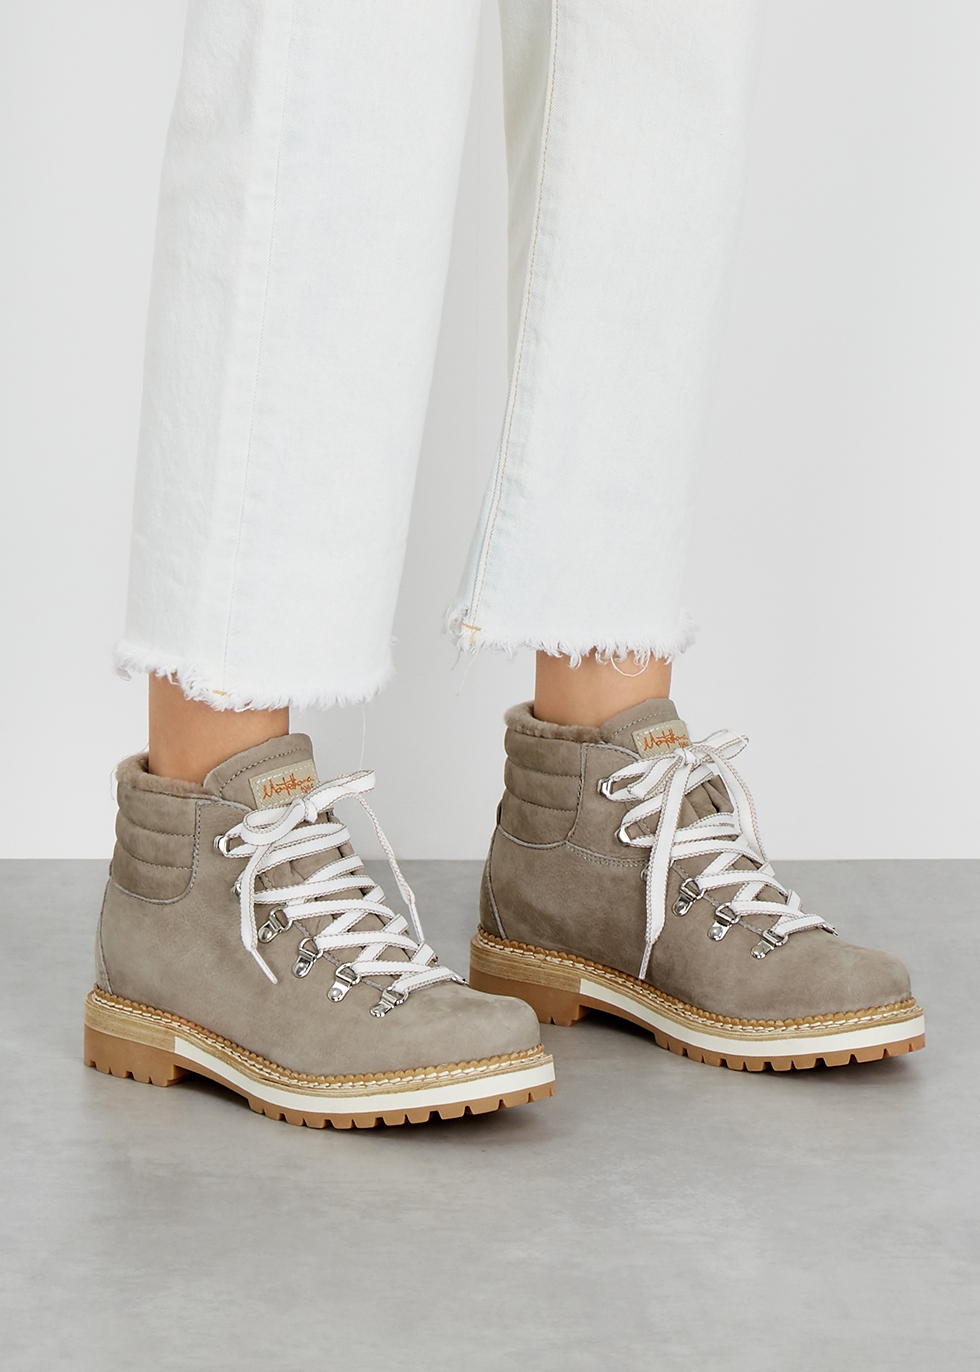 shearling lined ankle boots